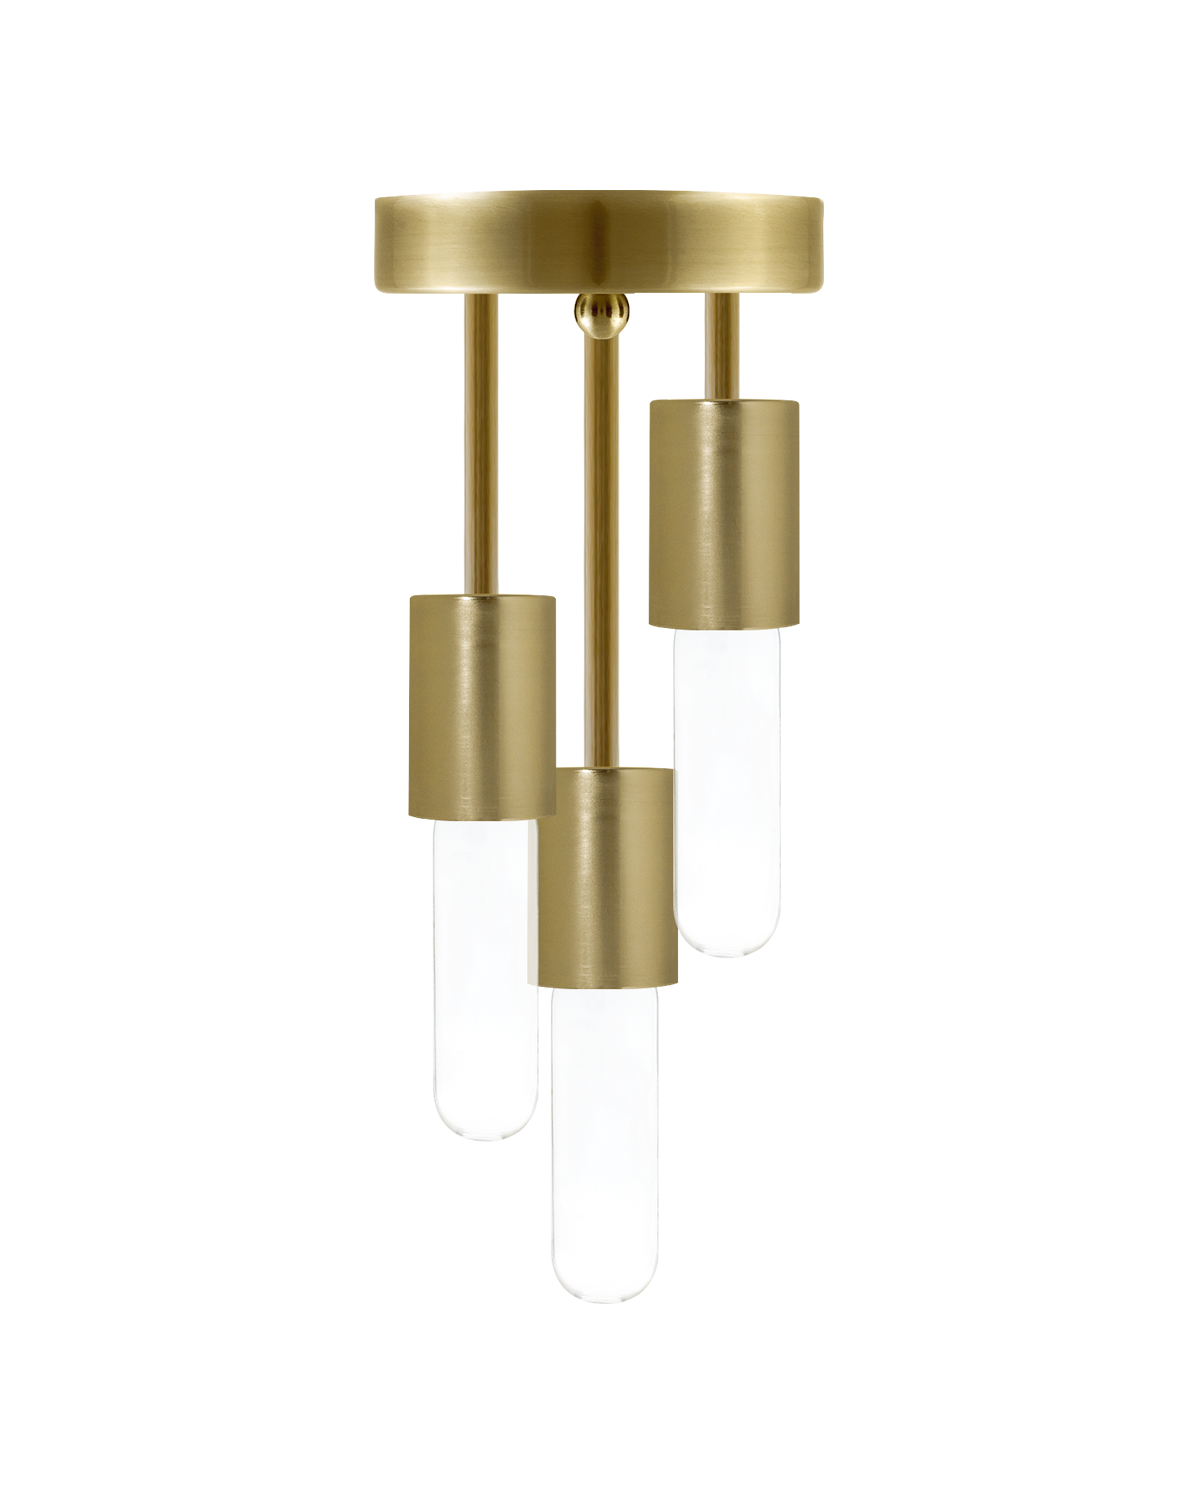 Semi-flush mount light fixture with a brushed brass base and three hanging bulbs with matching brass cylindrical housings.